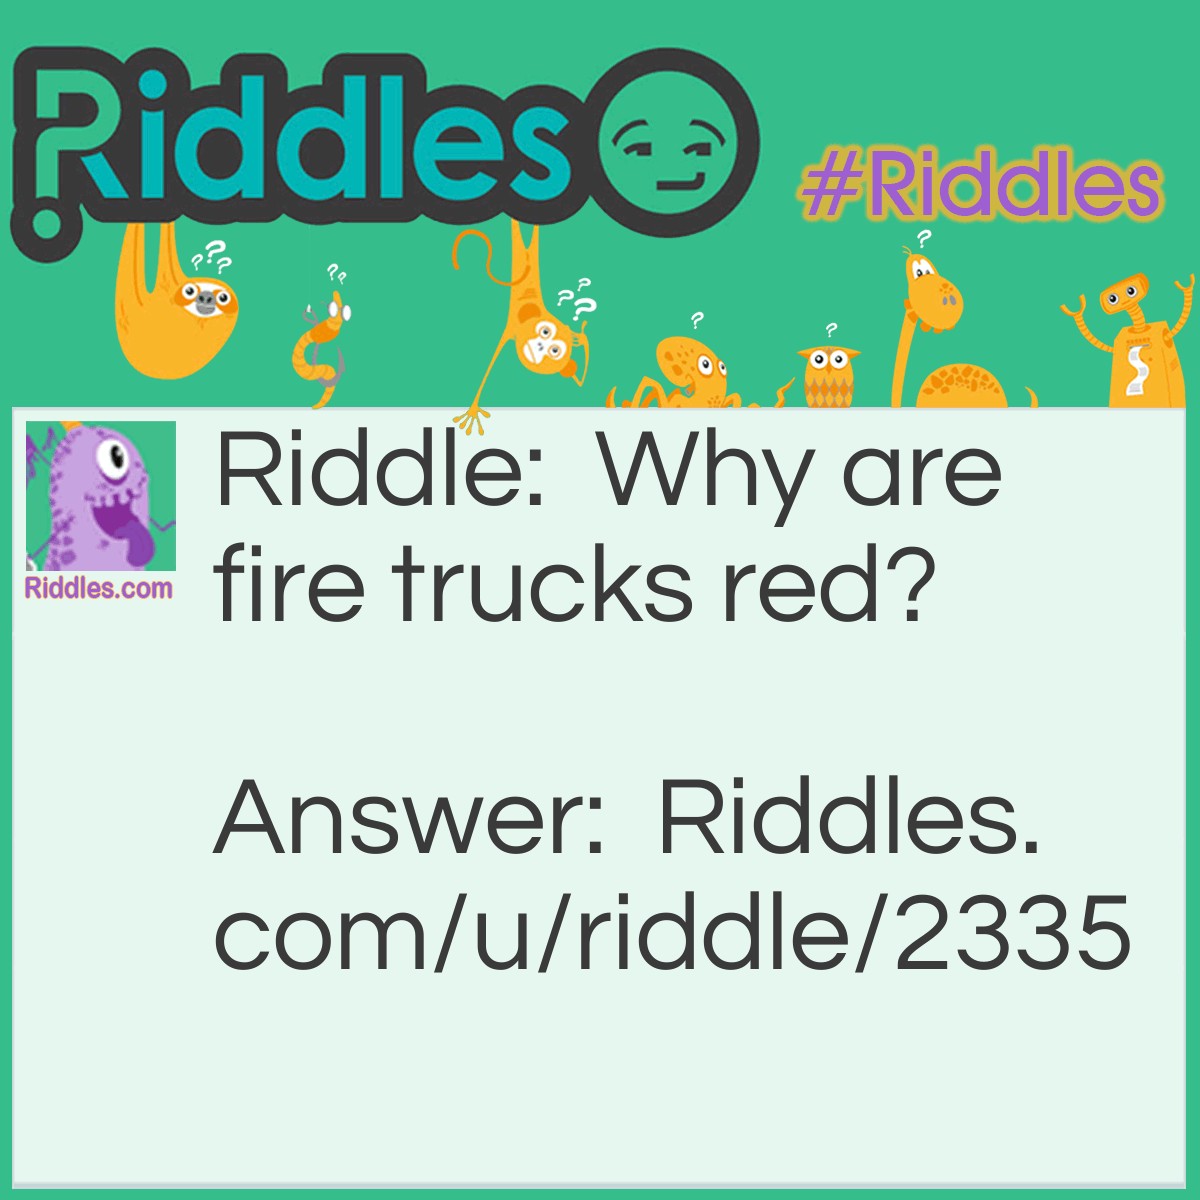 Riddle: Why are fire trucks red? Answer: Because they have eight wheels and four people on them, and four plus eight makes twelve, and there are twelve inches in a foot, and one foot is a ruler, and Queen Elizabeth was a ruler, and Queen Elizabeth was also a ship, and the ship sailed the seas, and there were fish in the seas, and fish have fins, and the Finns fought the Russians, and the Russians are red, and fire trucks are always “Russian" around, so that's why fire trucks are red!